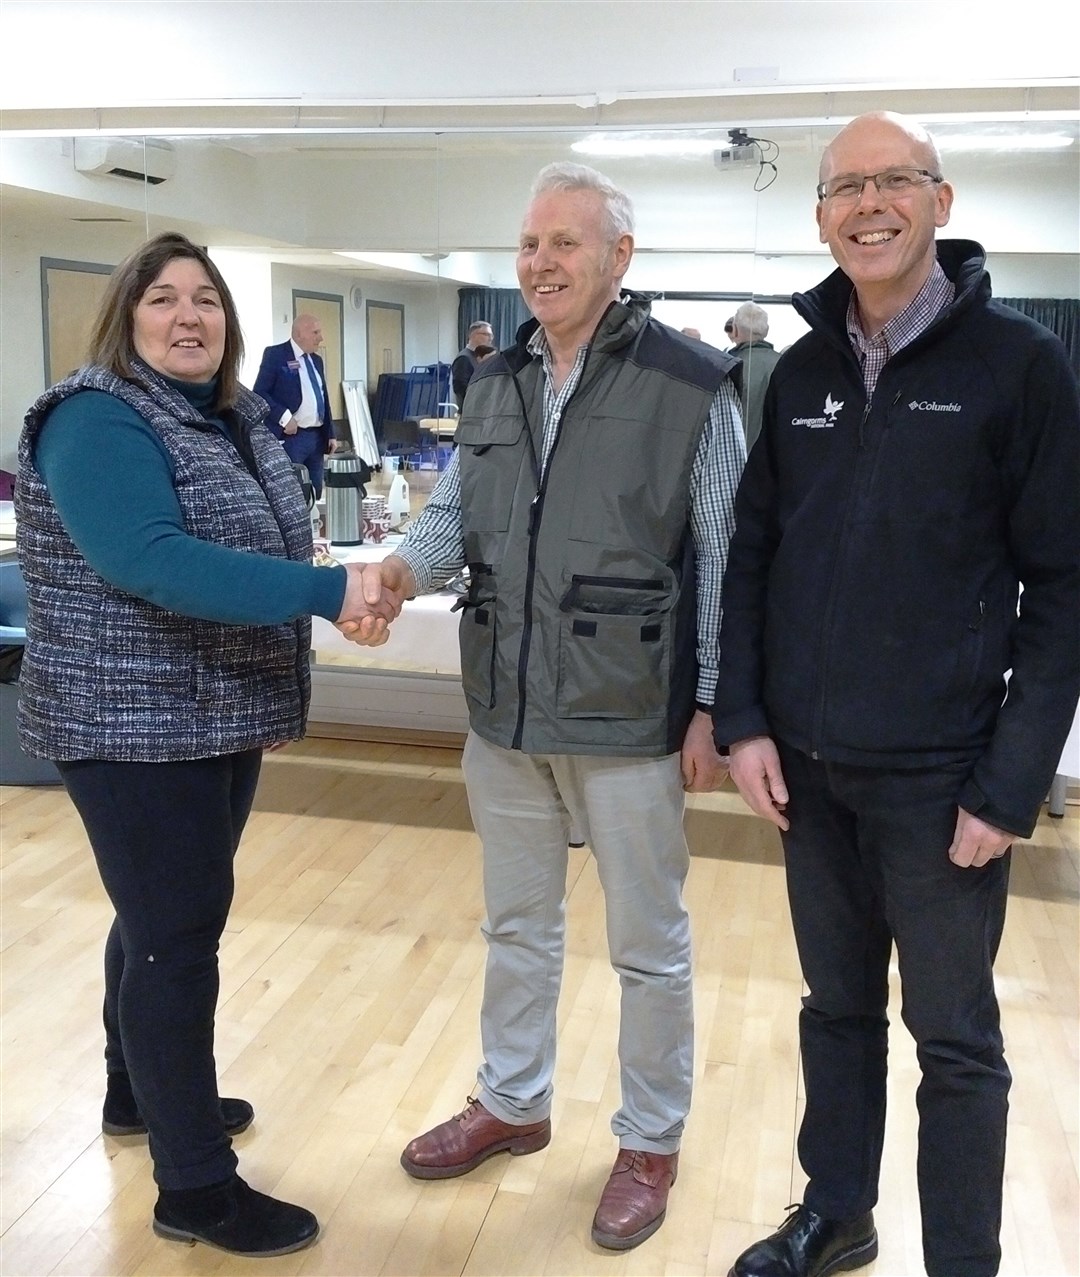 John Kirk (centre) is well-known in farming and community circles. He was a long time chair of Nethy Bridge Community Council and sits on the Cairngorms National Park Authority board. Here he is congratulated on his election to the board.